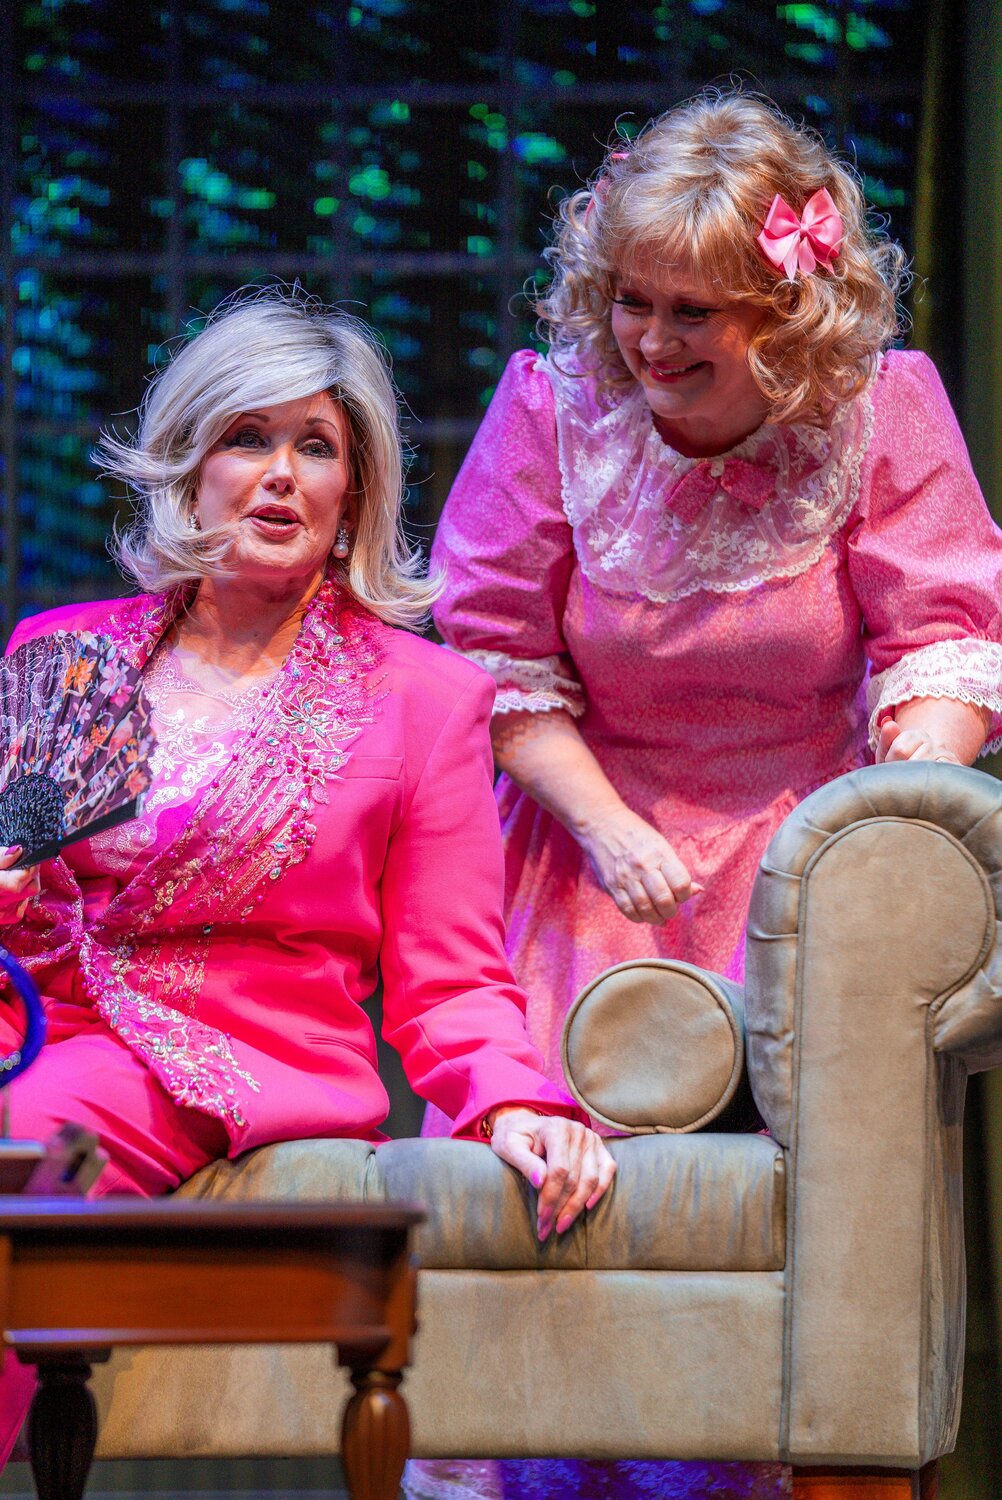 In the New Theatre and Restaurant’s production of “Always a Bridesmaid” last November Morgan Fairchild (left) starred as Monette Gentry, one of four women who honor a lifelong promise to be there for each other forever, no matter what. Her co-star, Lori Legacy (right)  shares this scene with her.